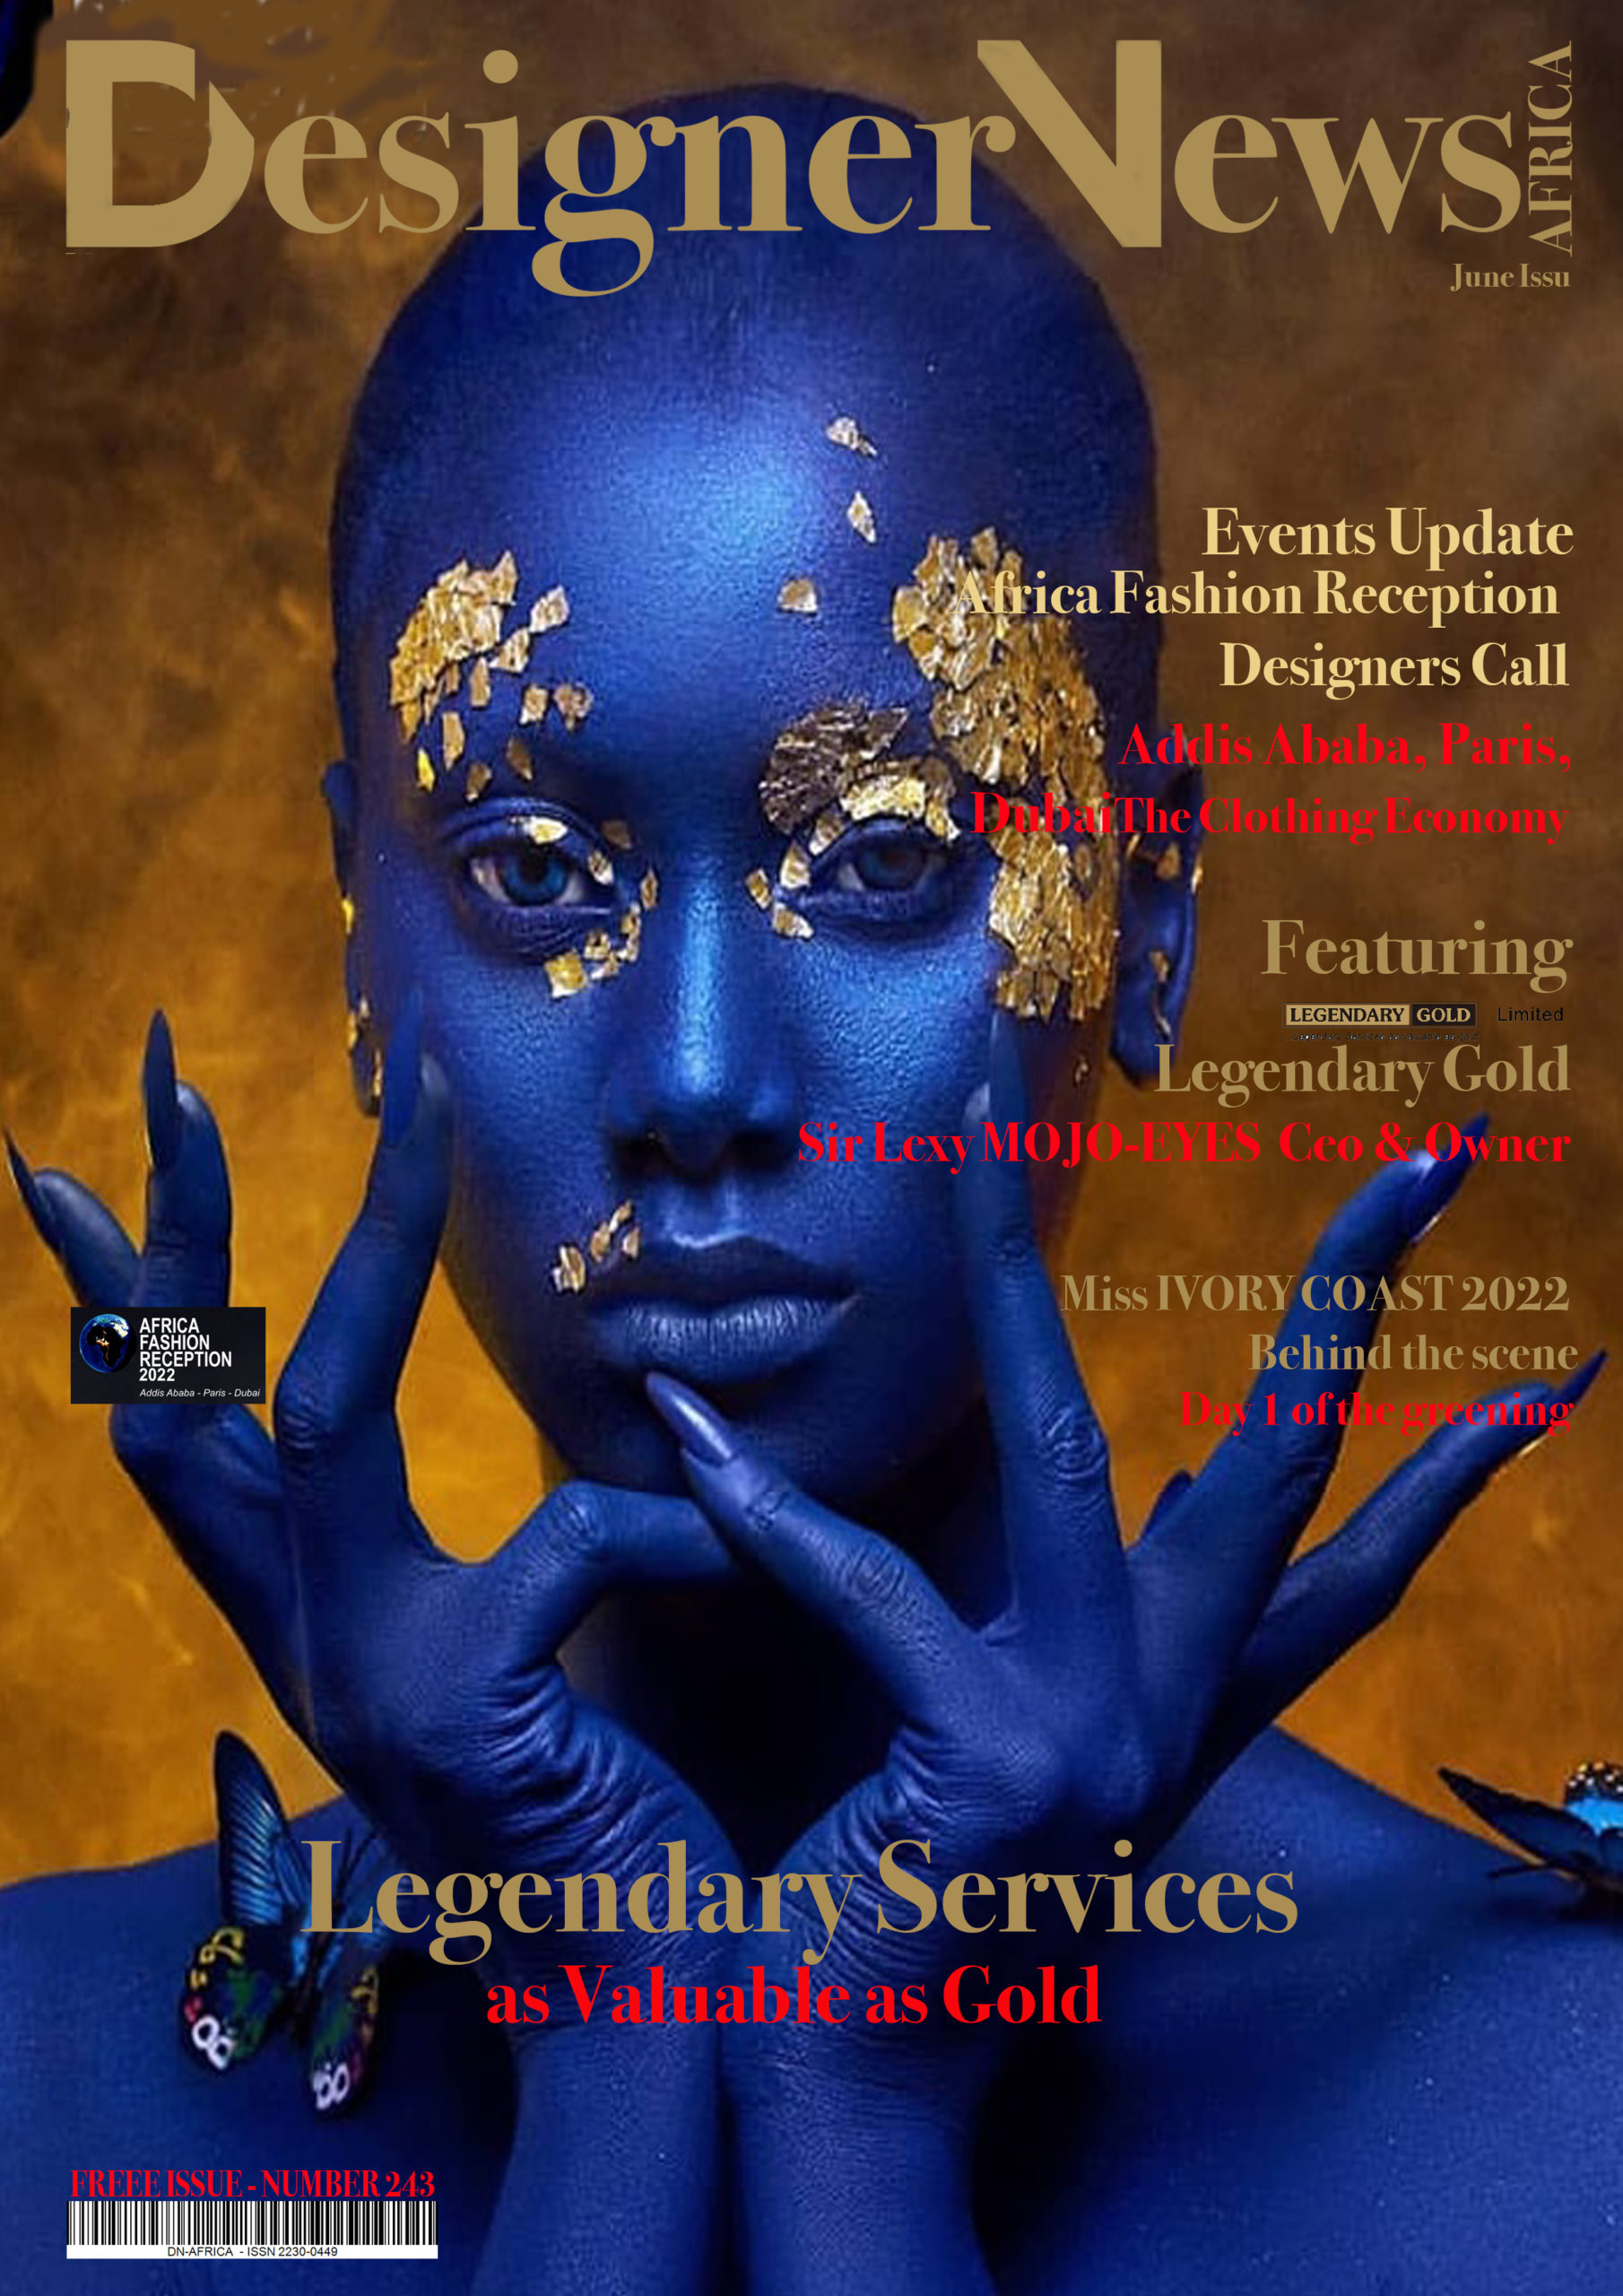 COVER-DN-AFRICA–-COVER-JUN-2022-MAG-–-NUMBER-243--2022–-AFRICAN-FASHION-RECEPTION-BY-LEGENDARY-GOLD-LEXY-MOYO-EYES-Ceo-and-Owner--DN-AFRICA-DN-A-INERNATIONAL-Media-Partner-AS-VOGUE-COVER